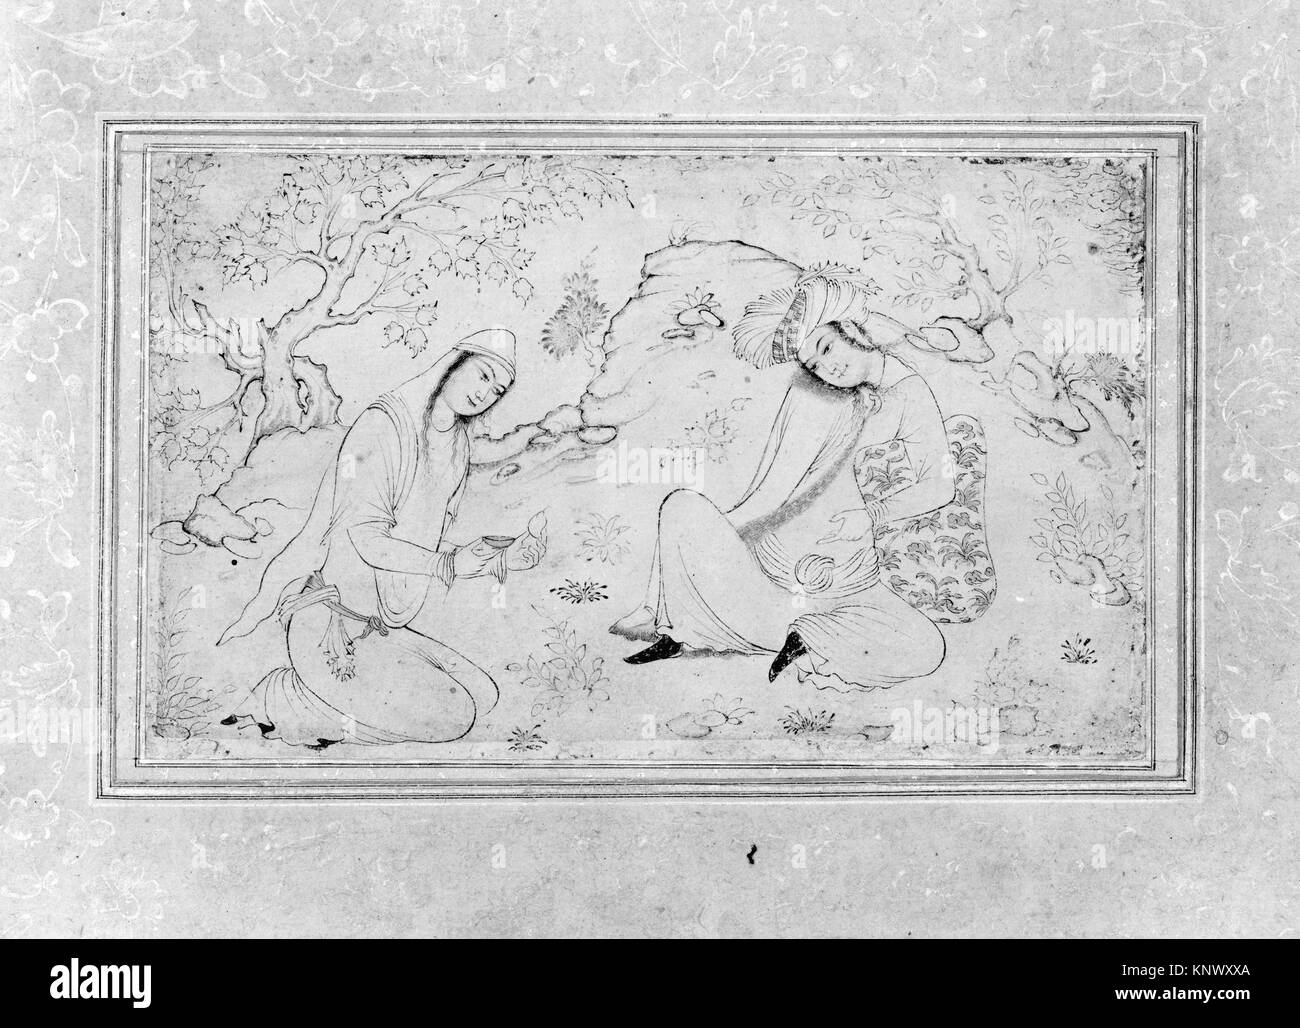 Young Man and Woman in a Landscape. Object Name: Illustrated album leaf; Date: first half 17th century; Geography: Attributed to Iran; Medium: Ink, Stock Photo